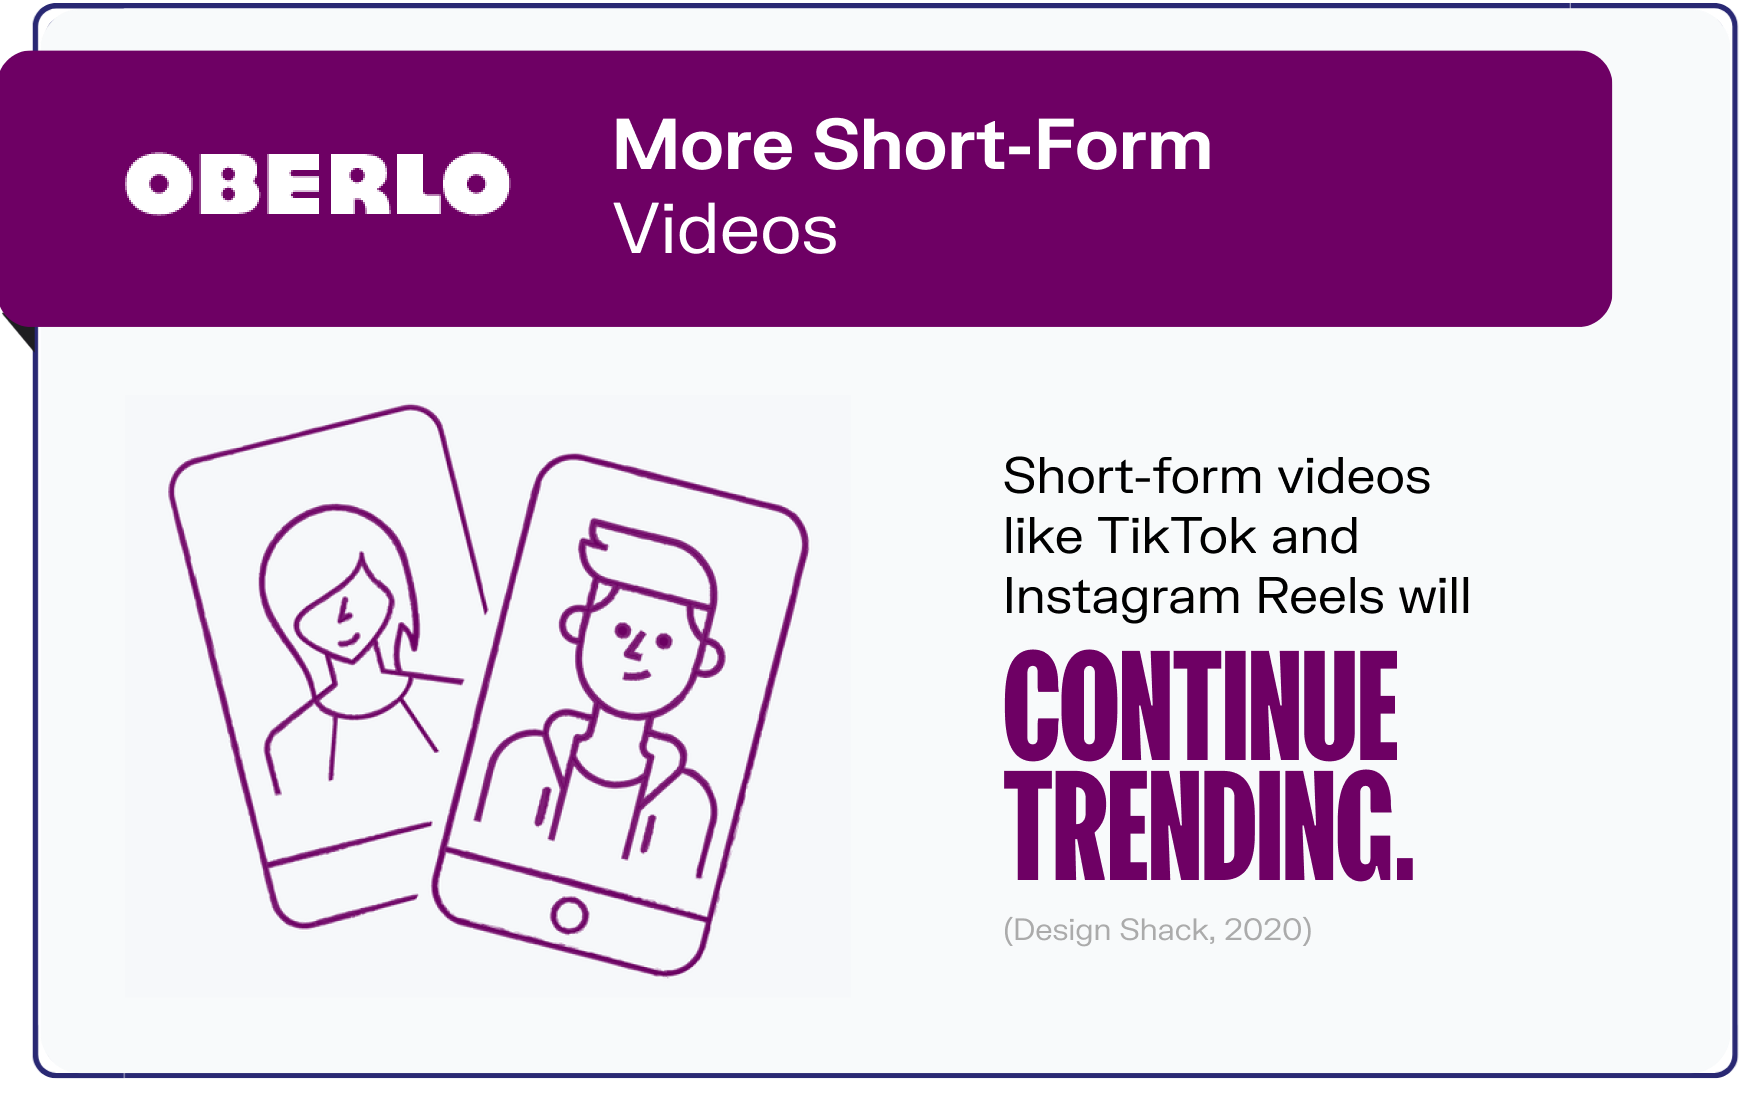 video marketing trends graphic3